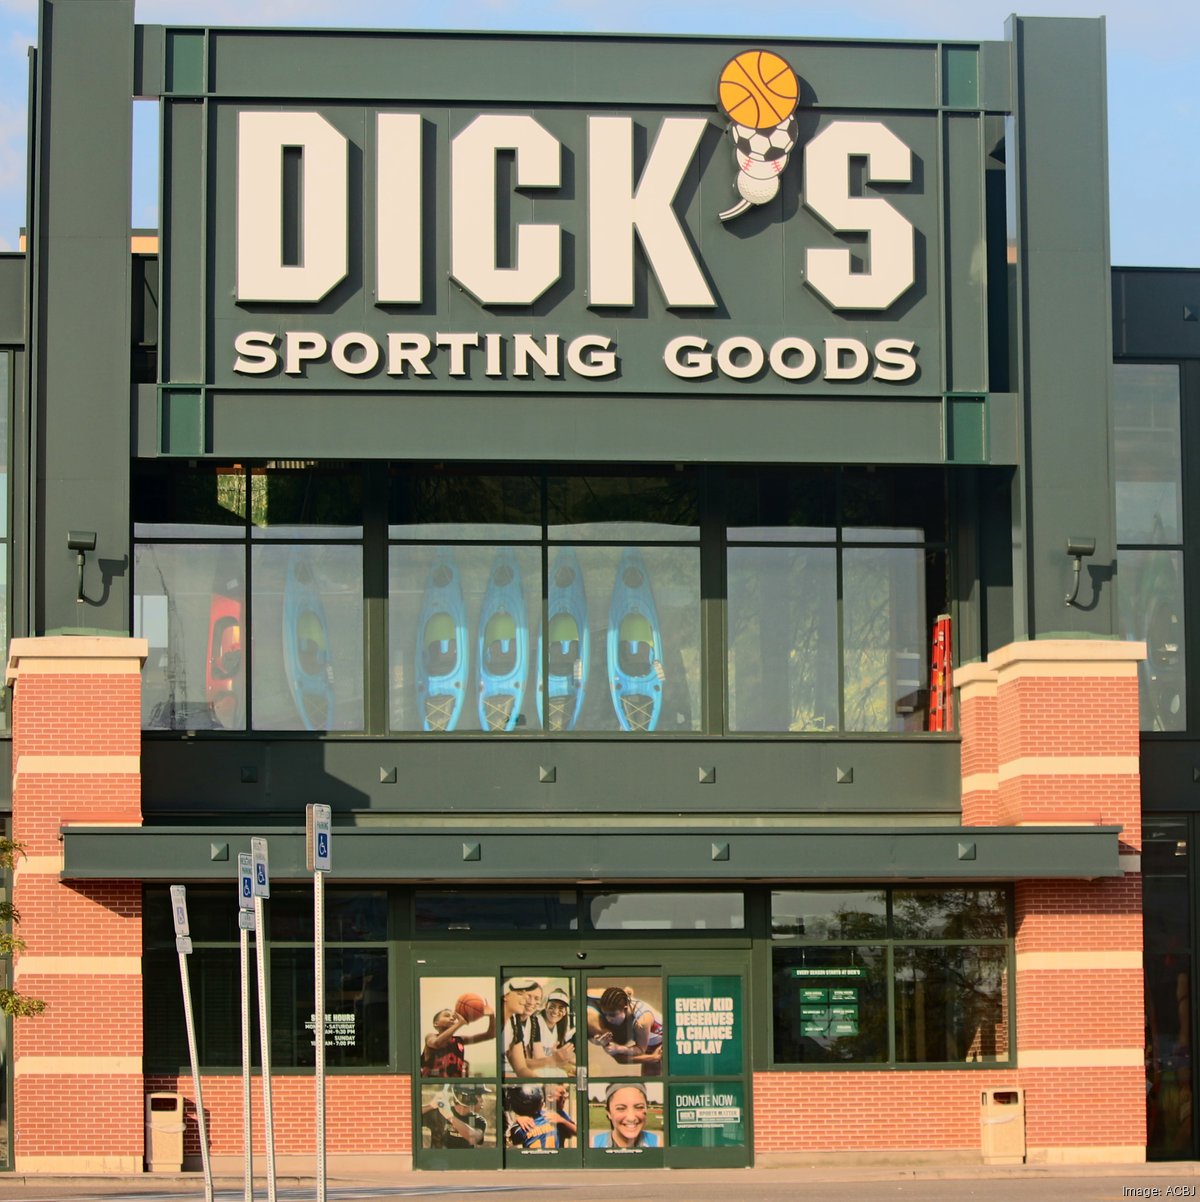 DICK'S Sporting Goods Launches Partnership With Solely Fit